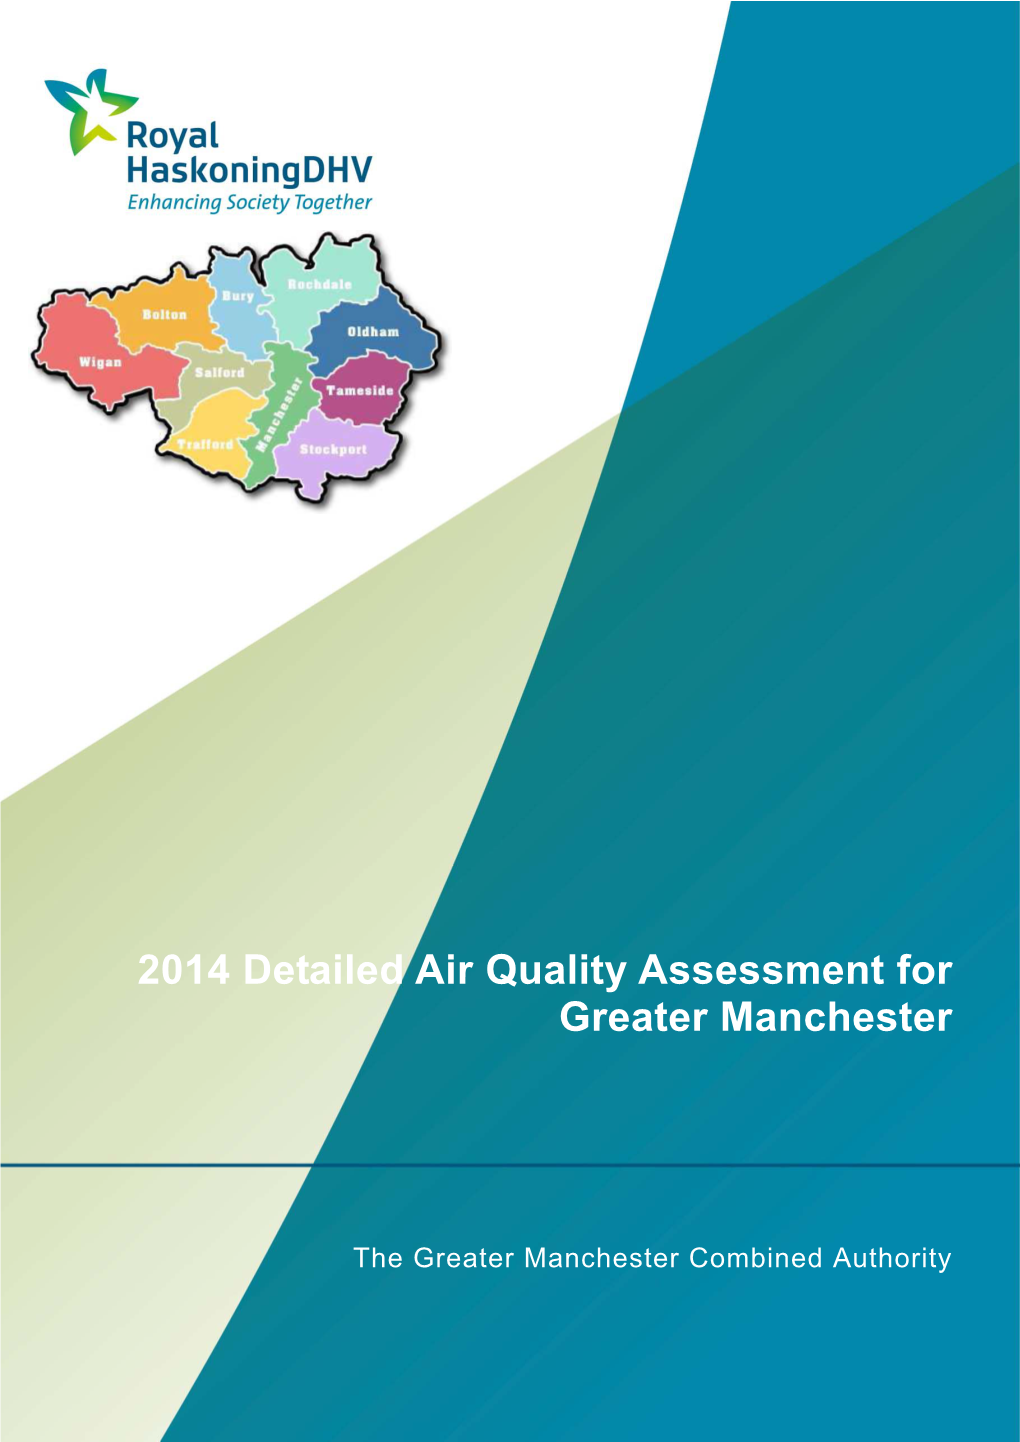 2014 Detailed Air Quality Assessment for Greater Manchester